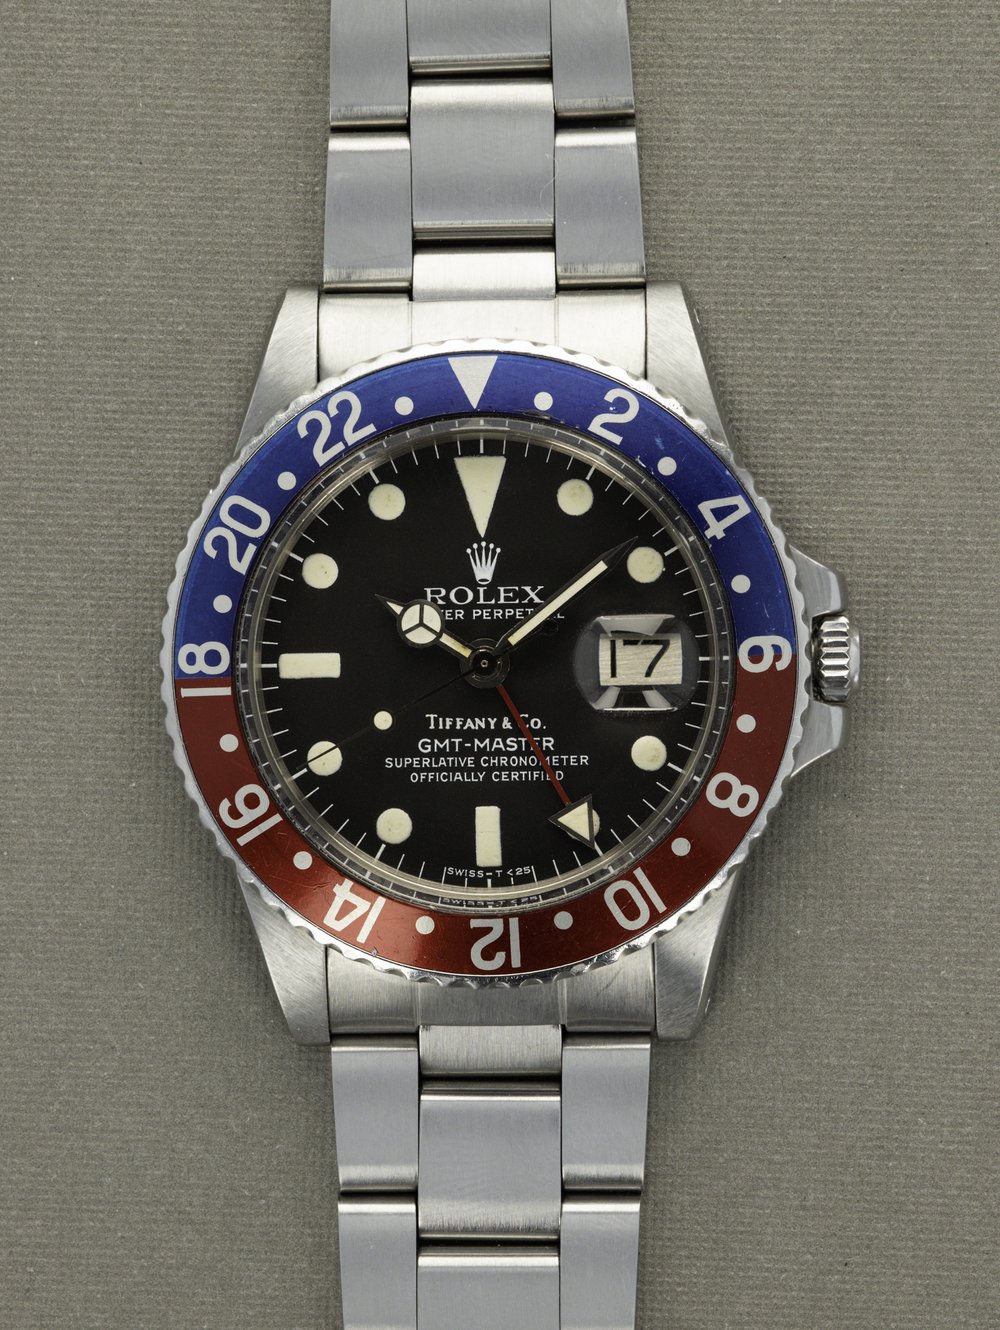 assimilation Overlevelse meditativ Rolex GMT-Master Ref 1675 - Mk4 Dial Retailed by Tiffany & Co.